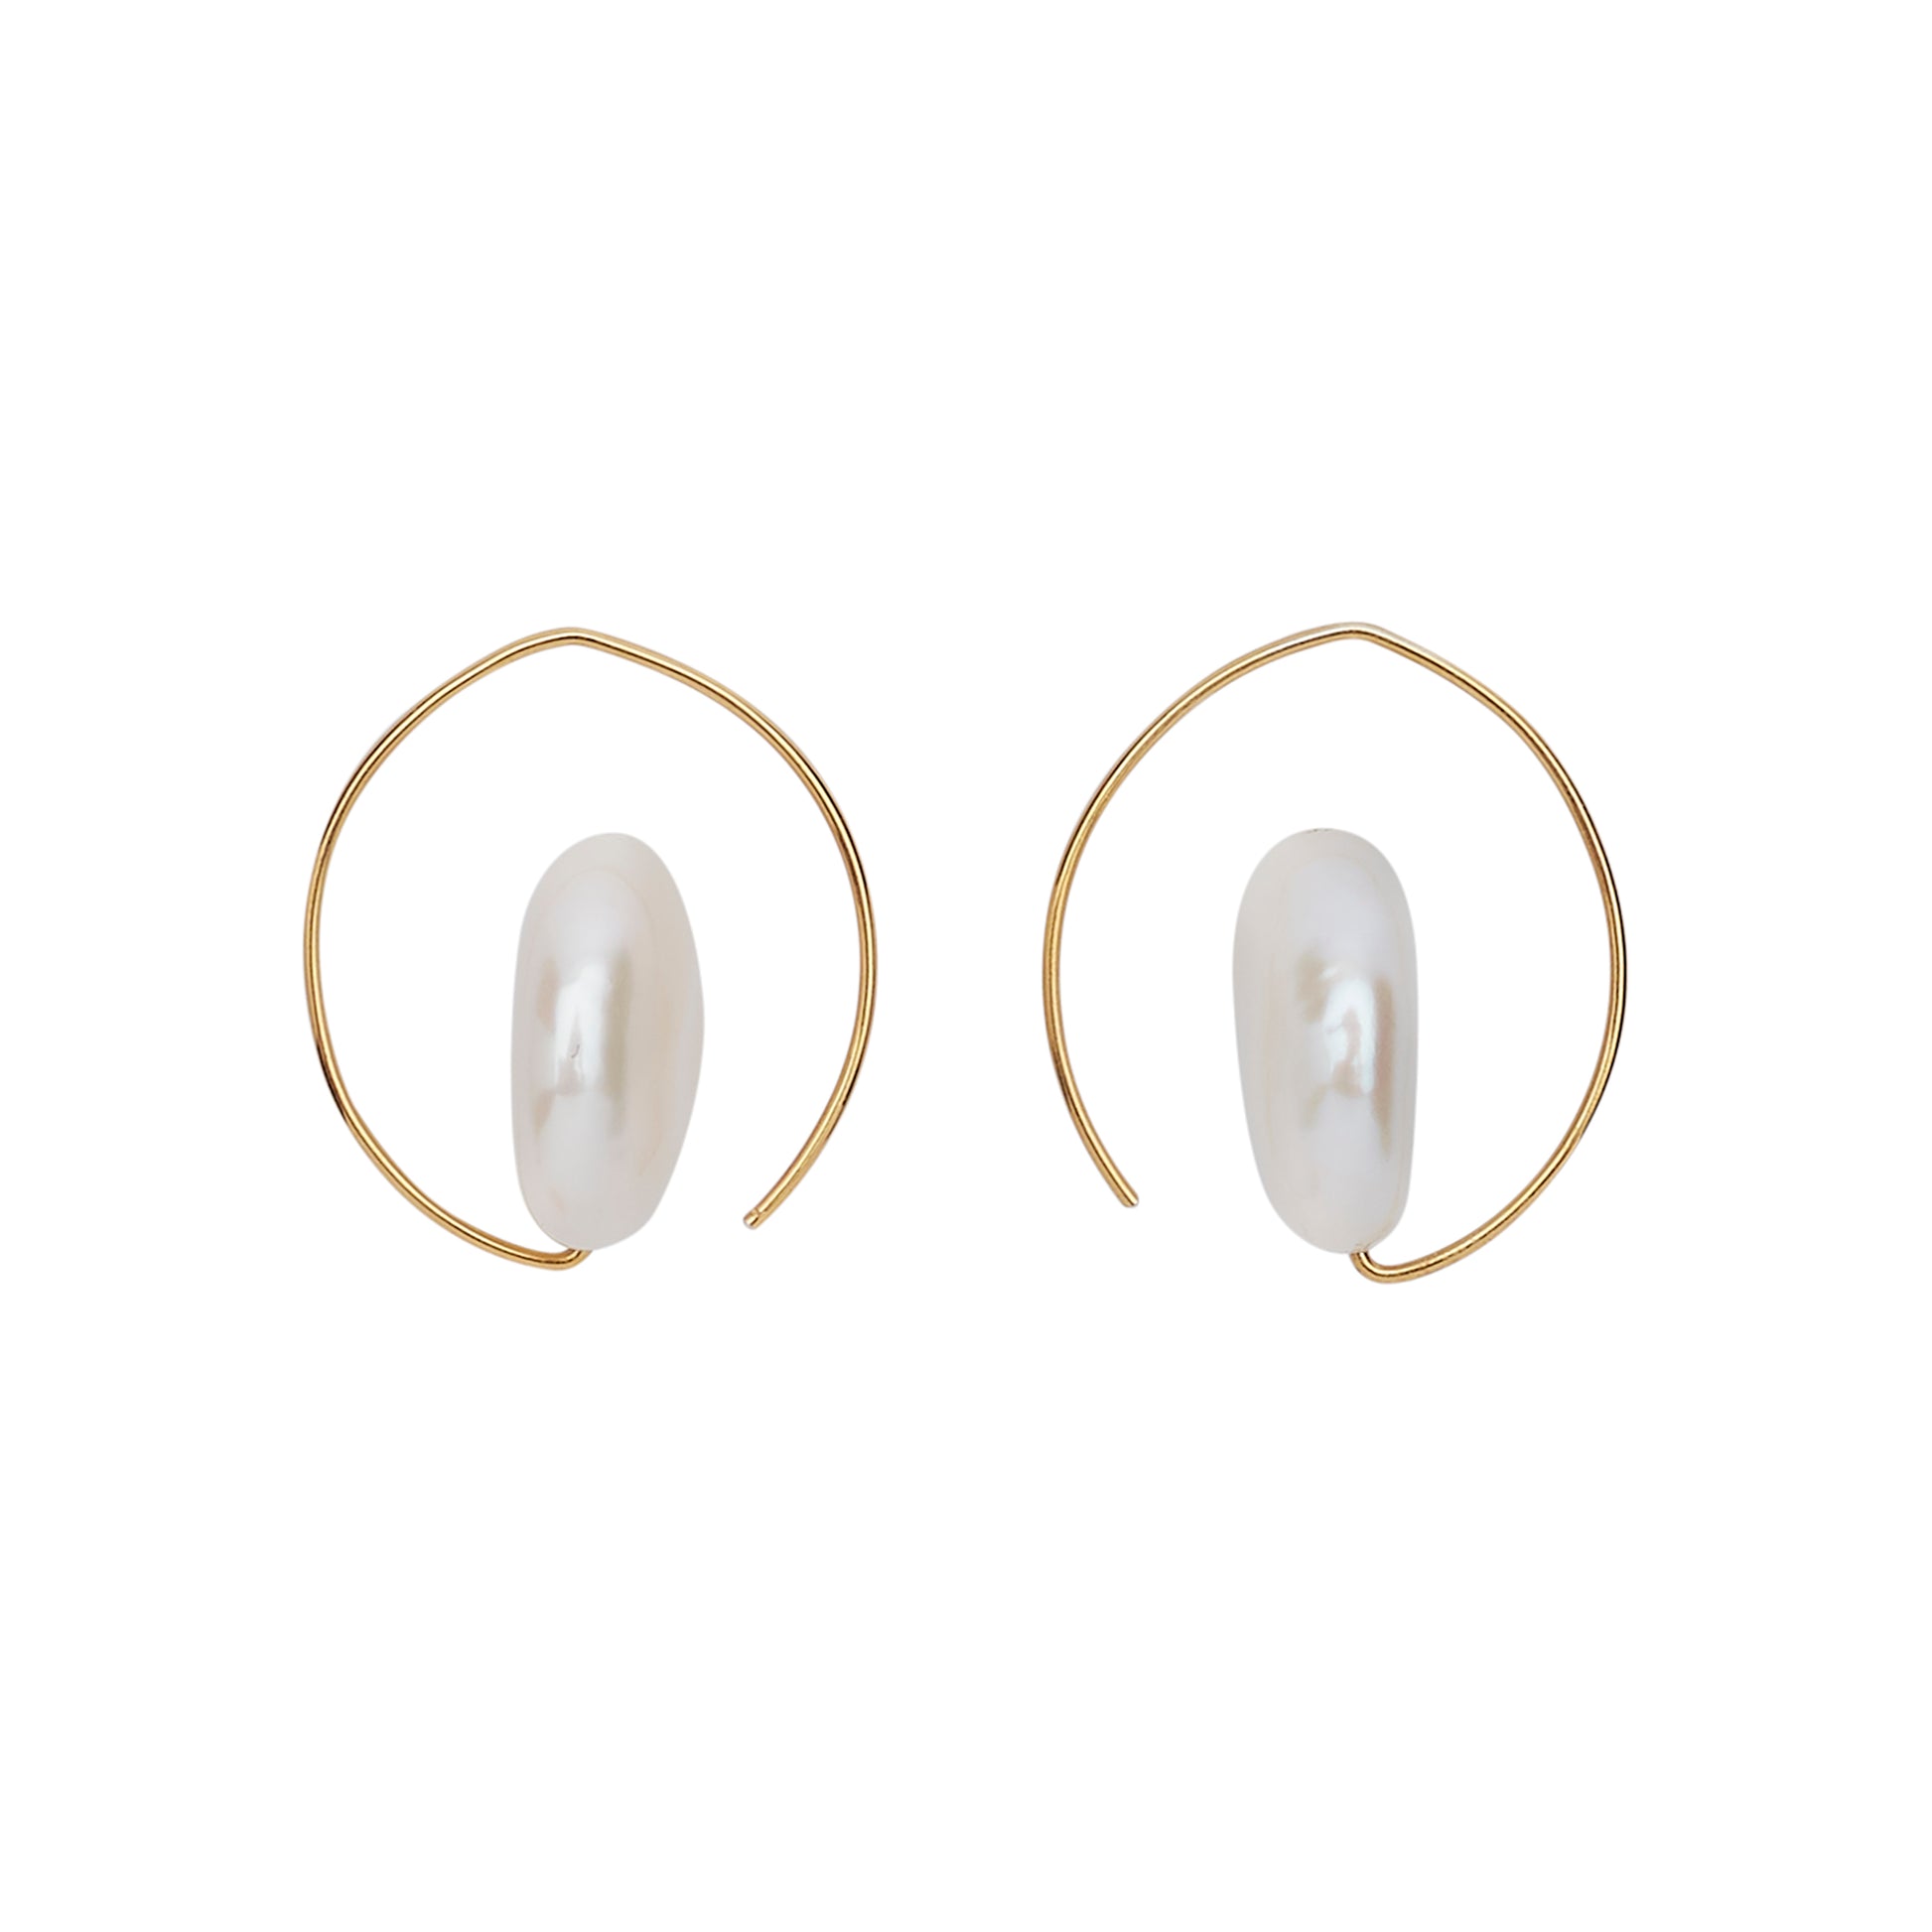 Petite Curl Earrings with White Fresh Water Pearl 